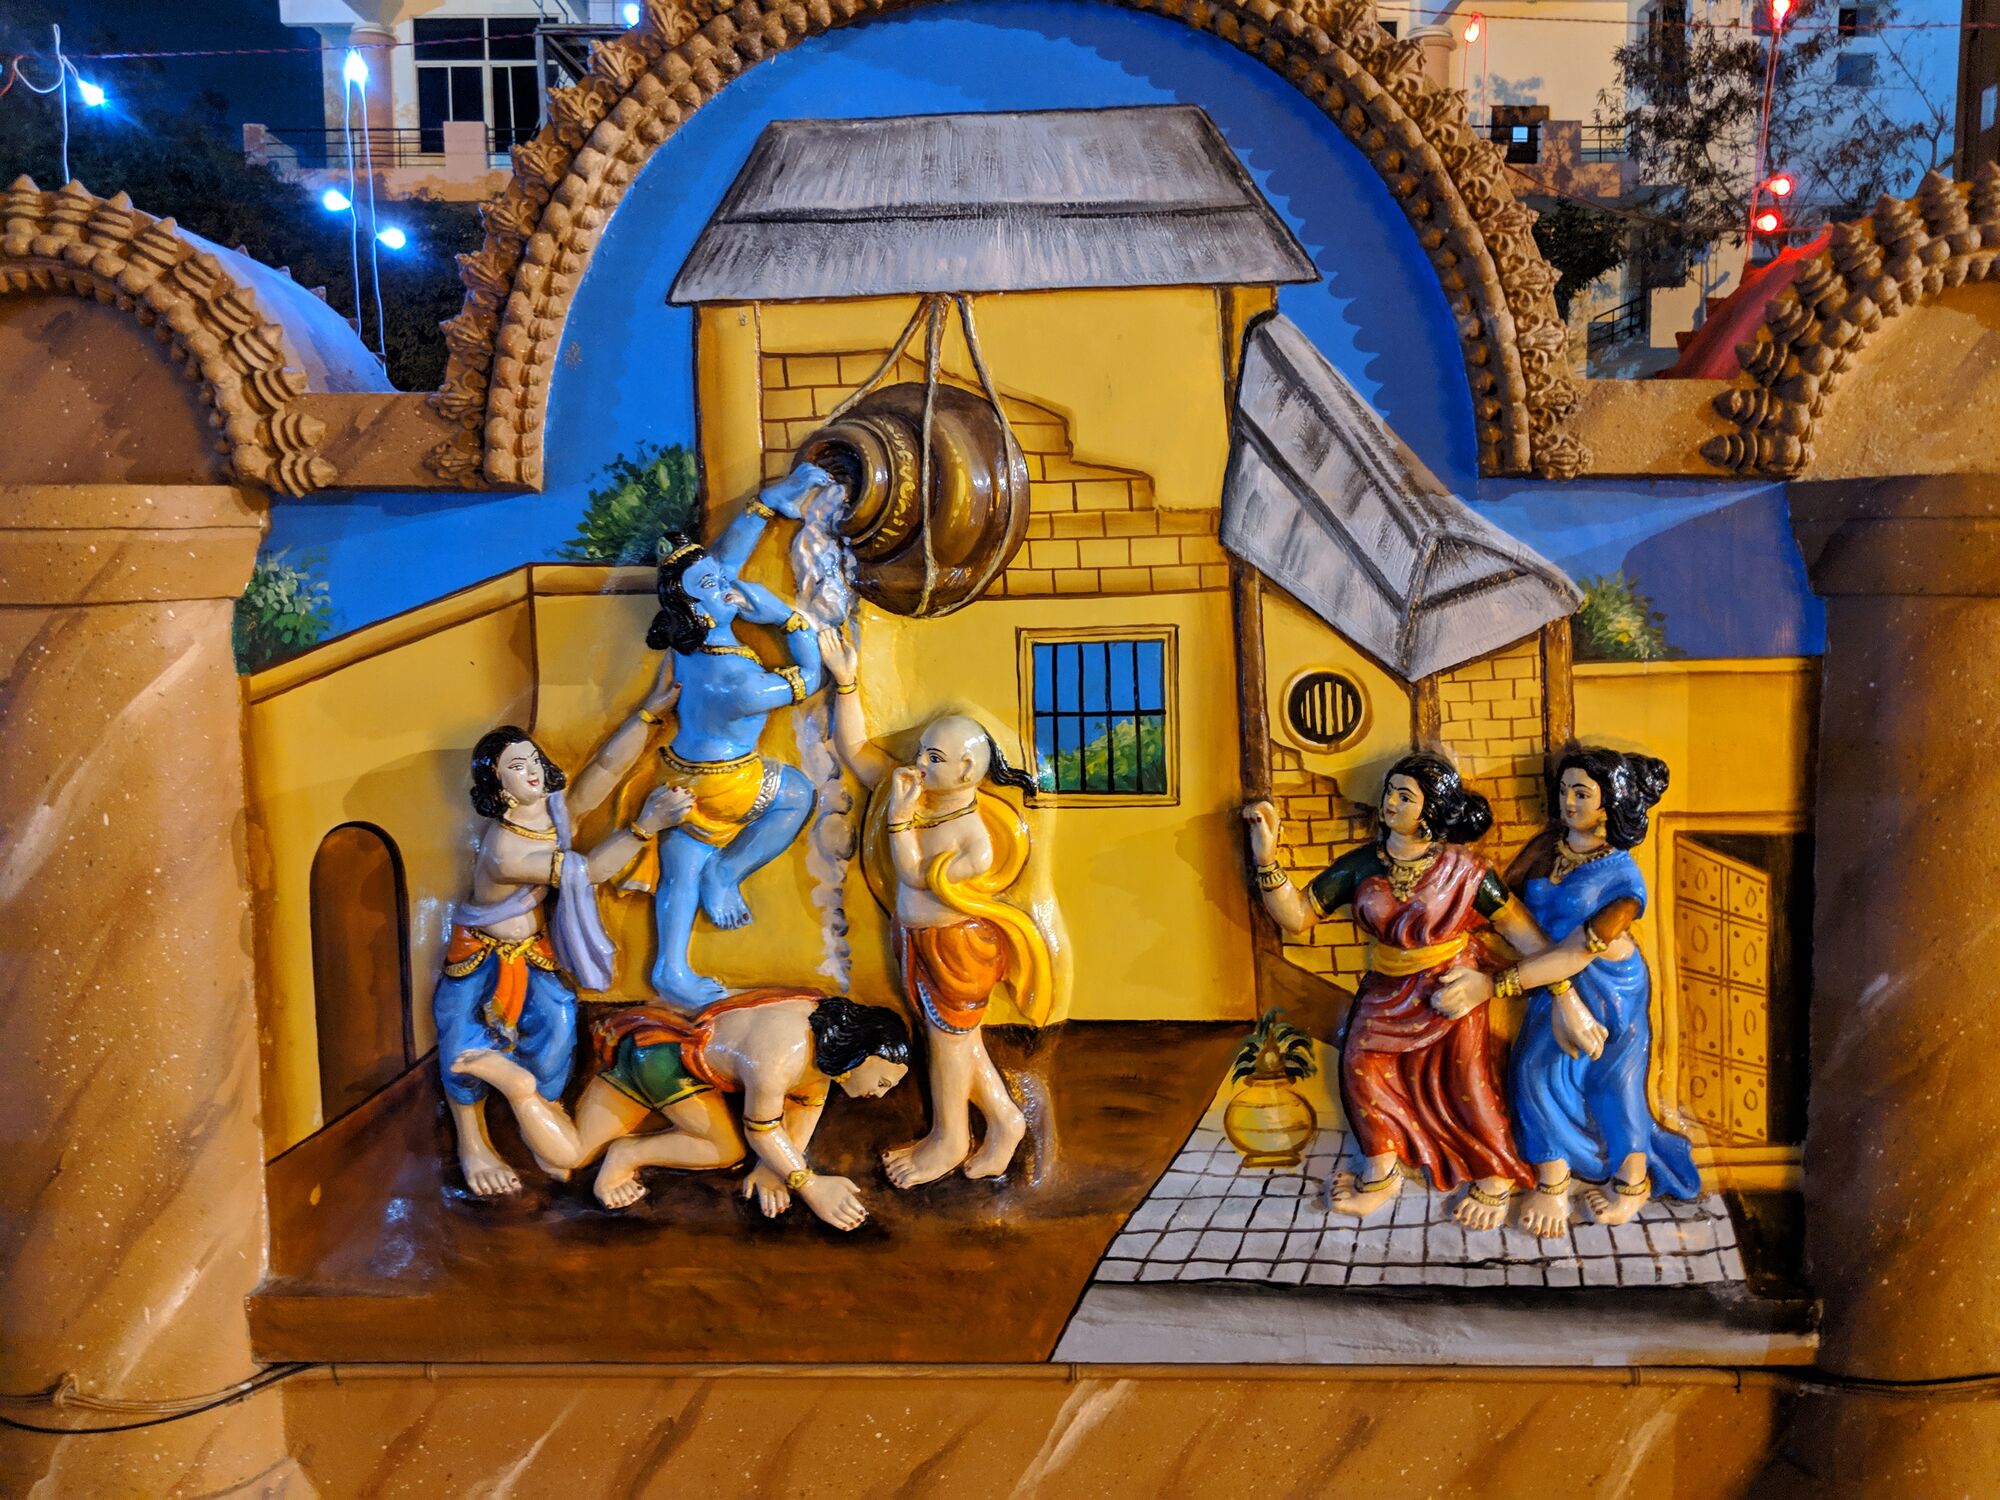 On the walls in the corridors outside, there are beautiful depictions of Sri Krishna Leela - this one is Baby Krishna stealing butter with his friends